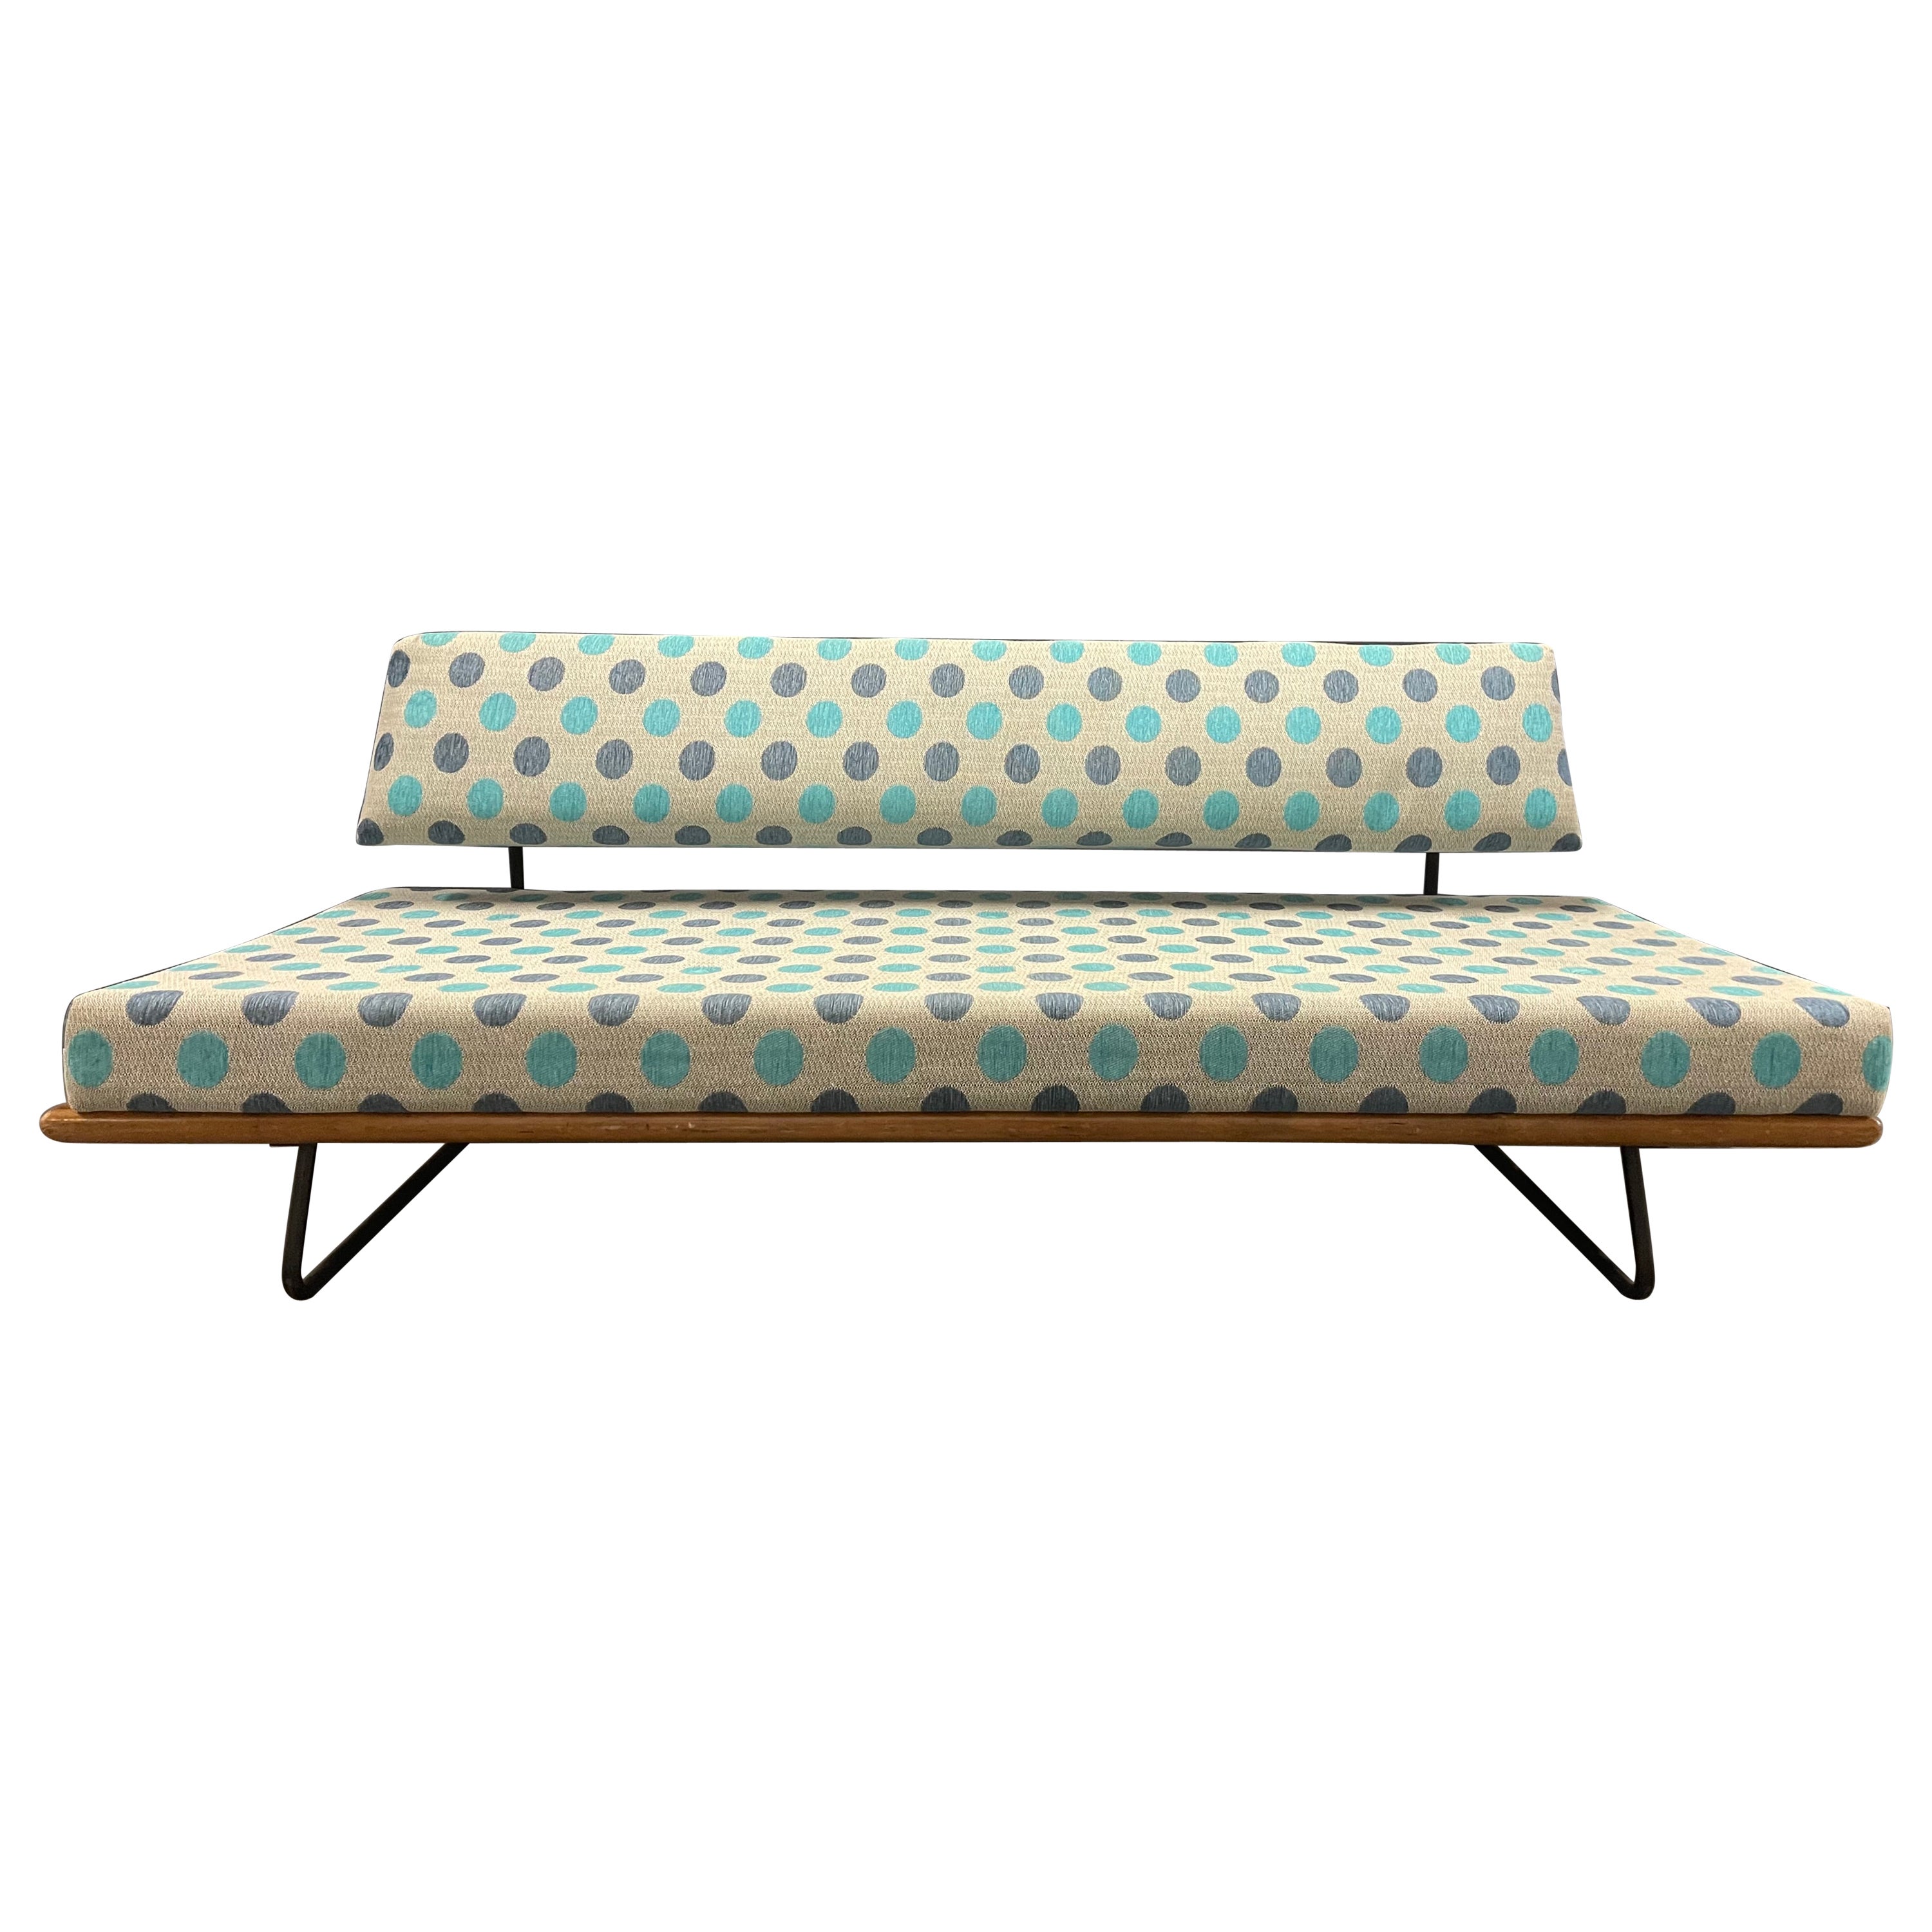 Rare No. 853 Daybed / Sofa by Cassina For Sale